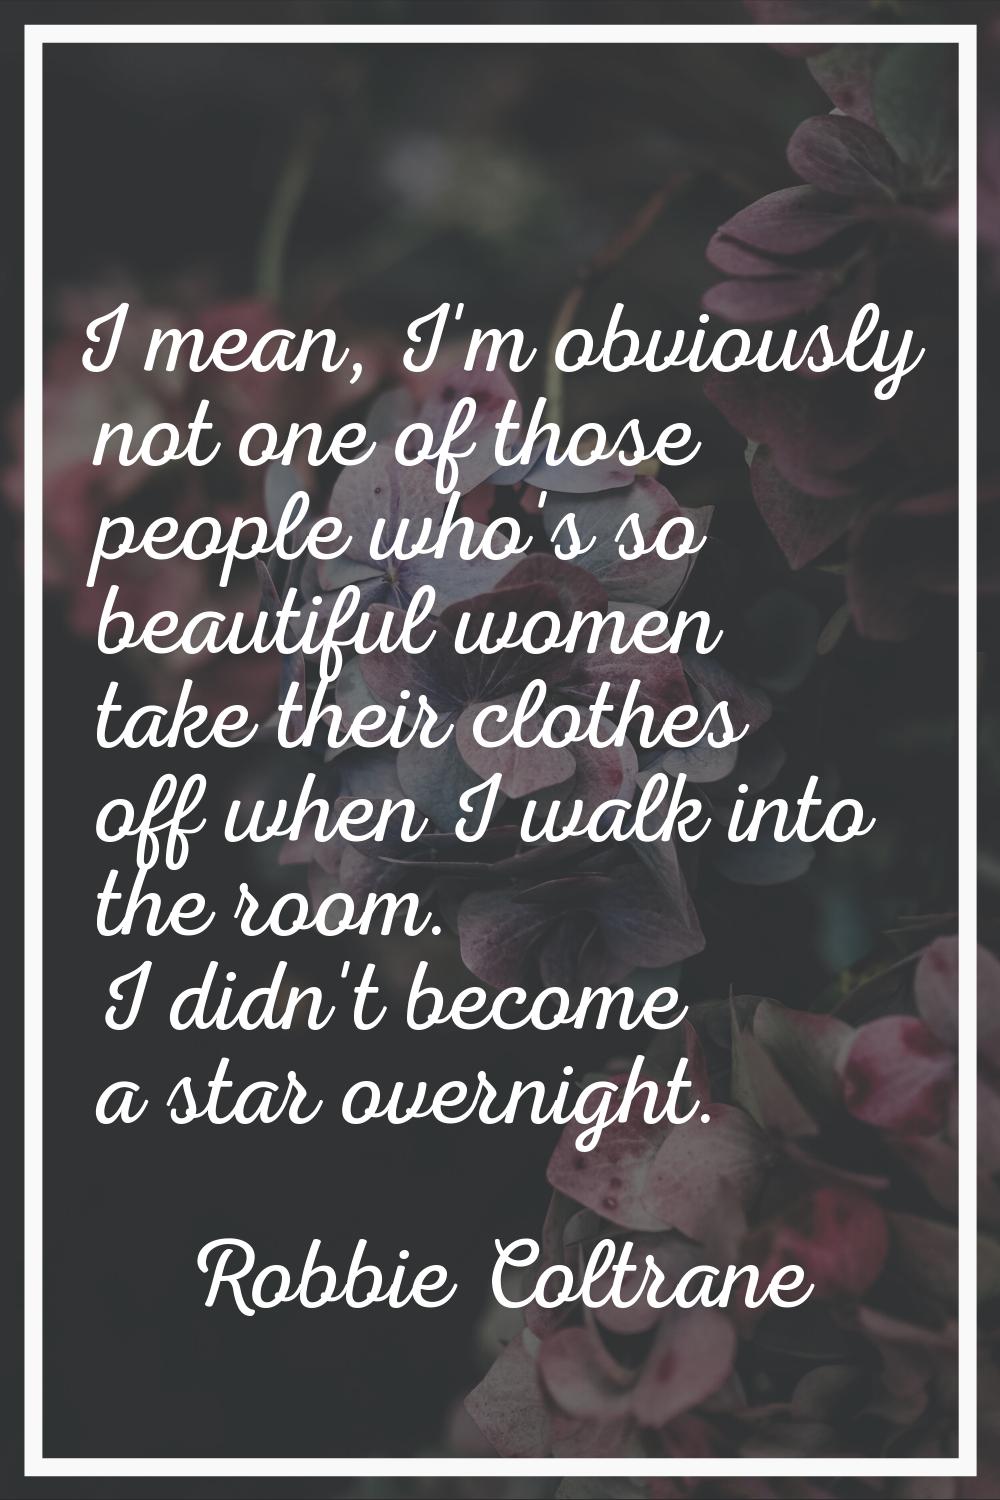 I mean, I'm obviously not one of those people who's so beautiful women take their clothes off when 